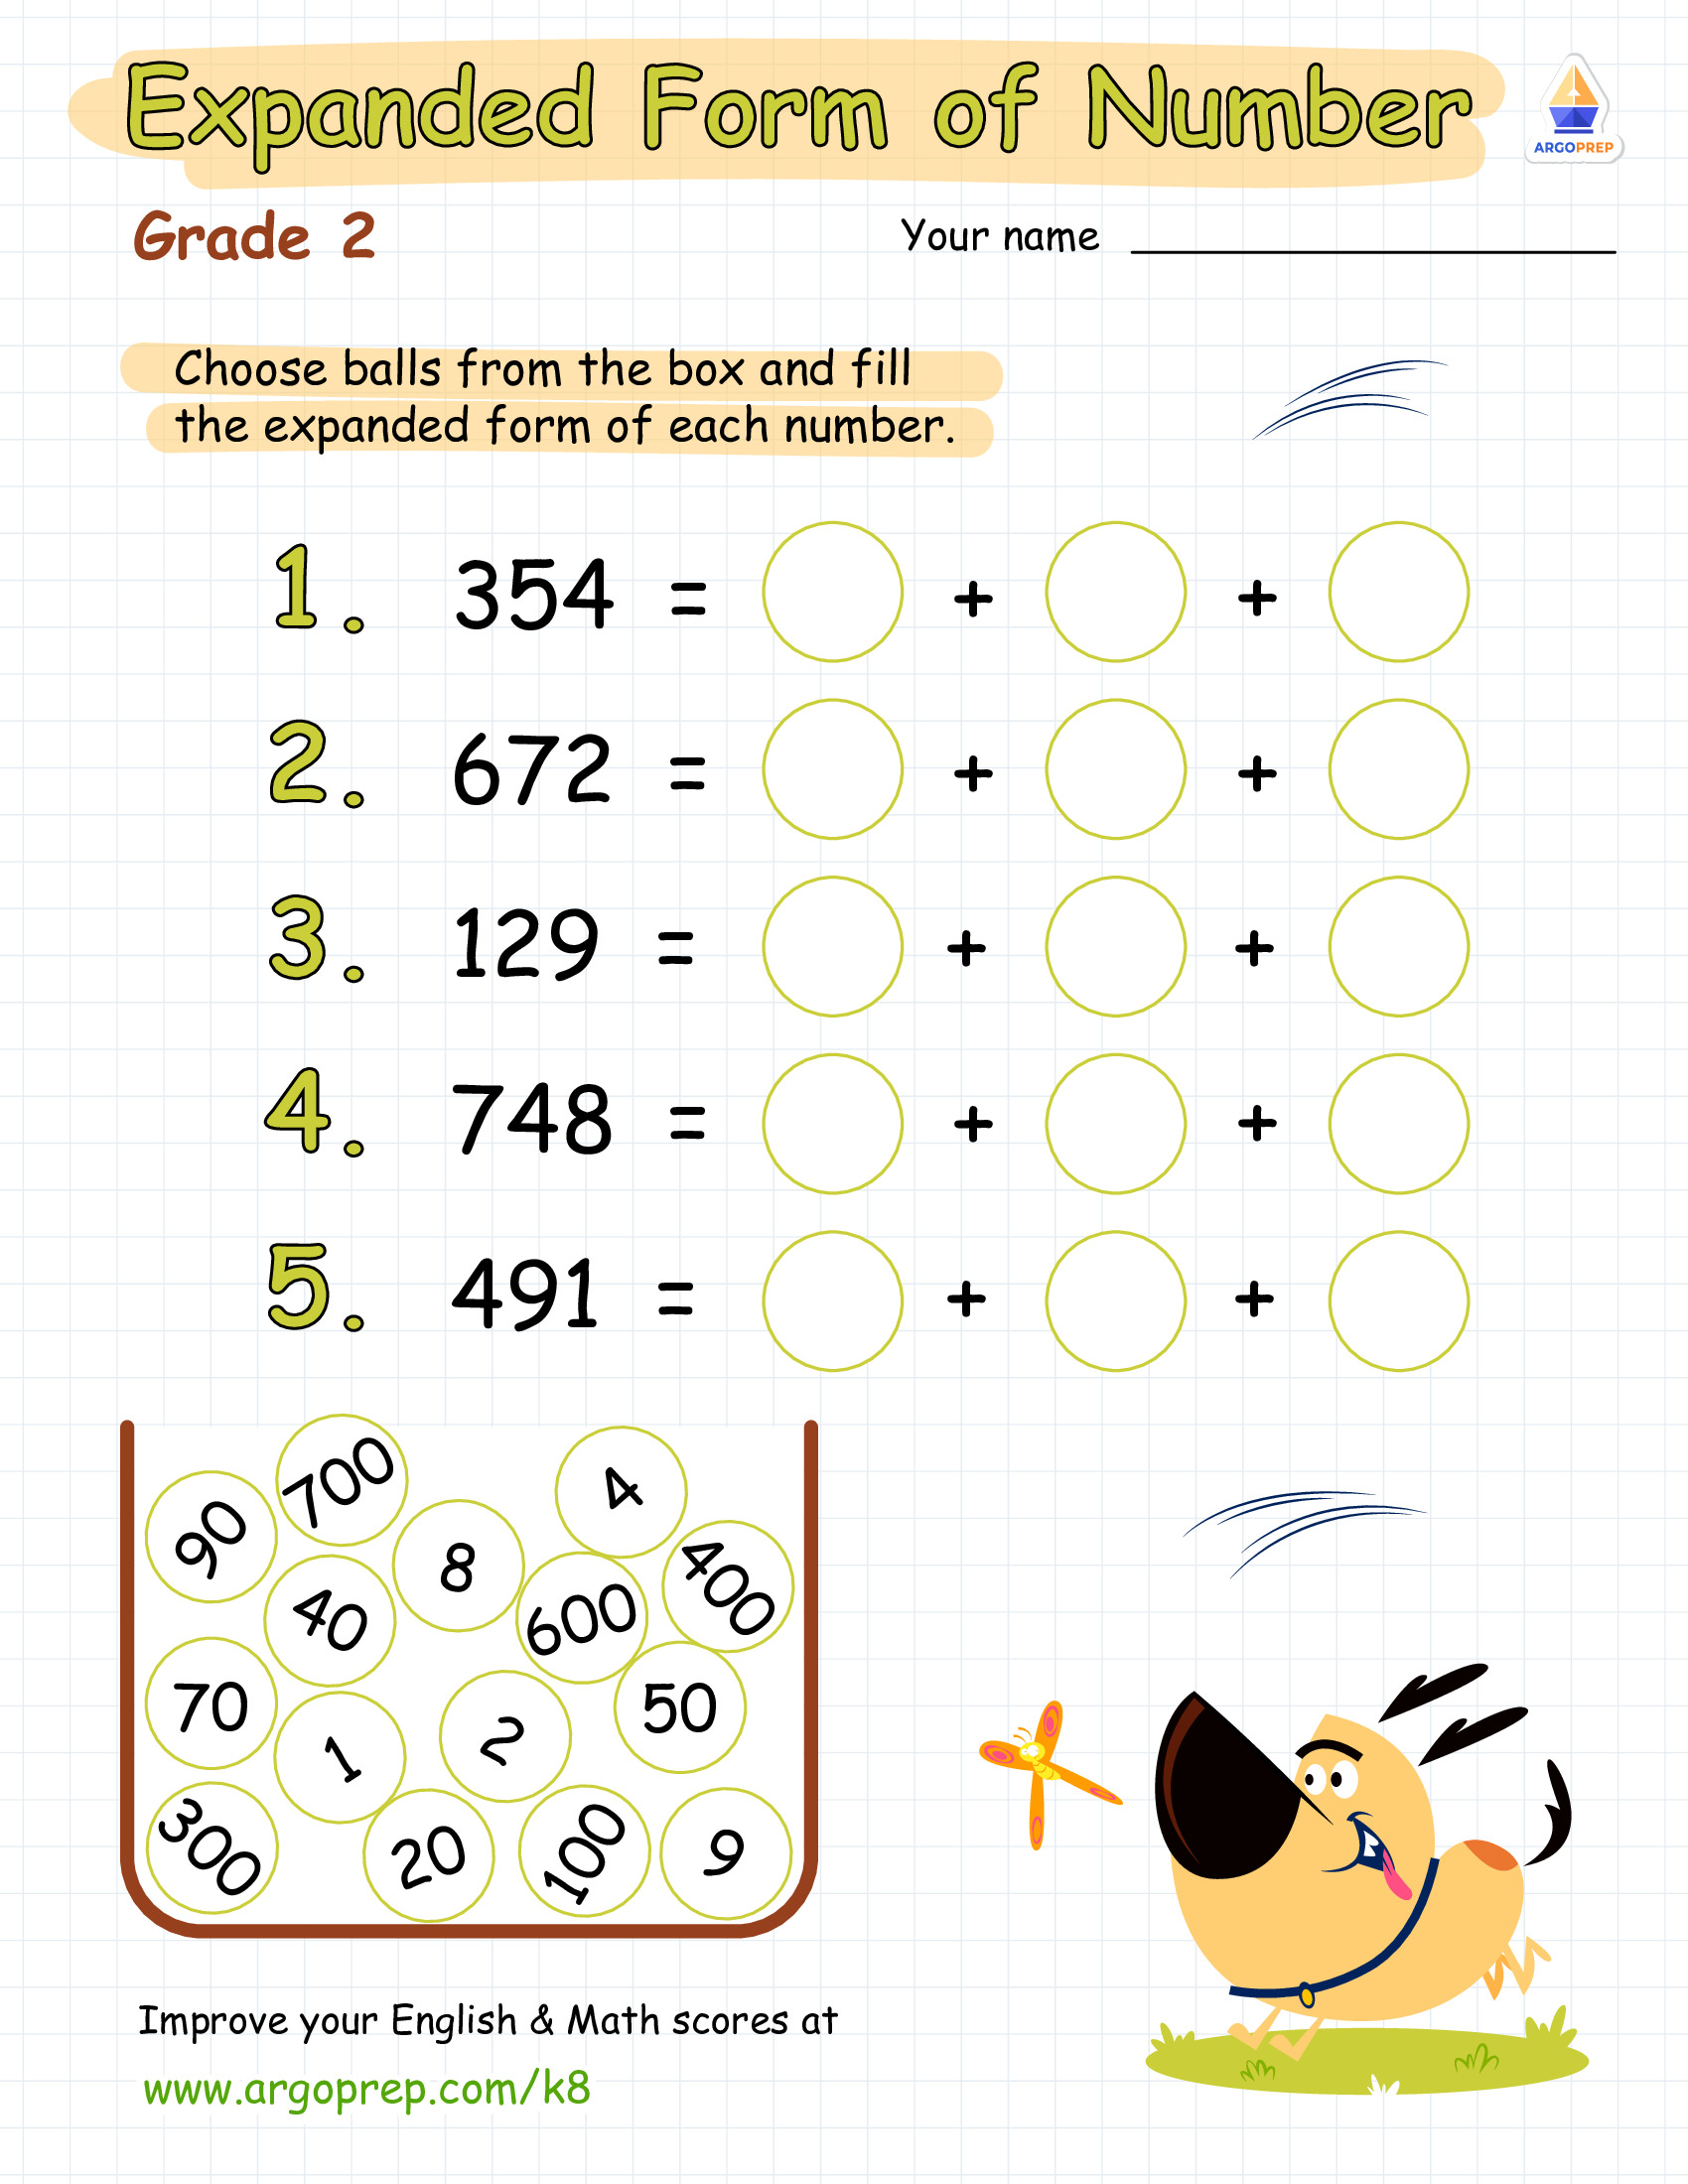 expanded-form-worksheets-simple-effective-exercises-to-improve-your-math-skills-free-worksheets